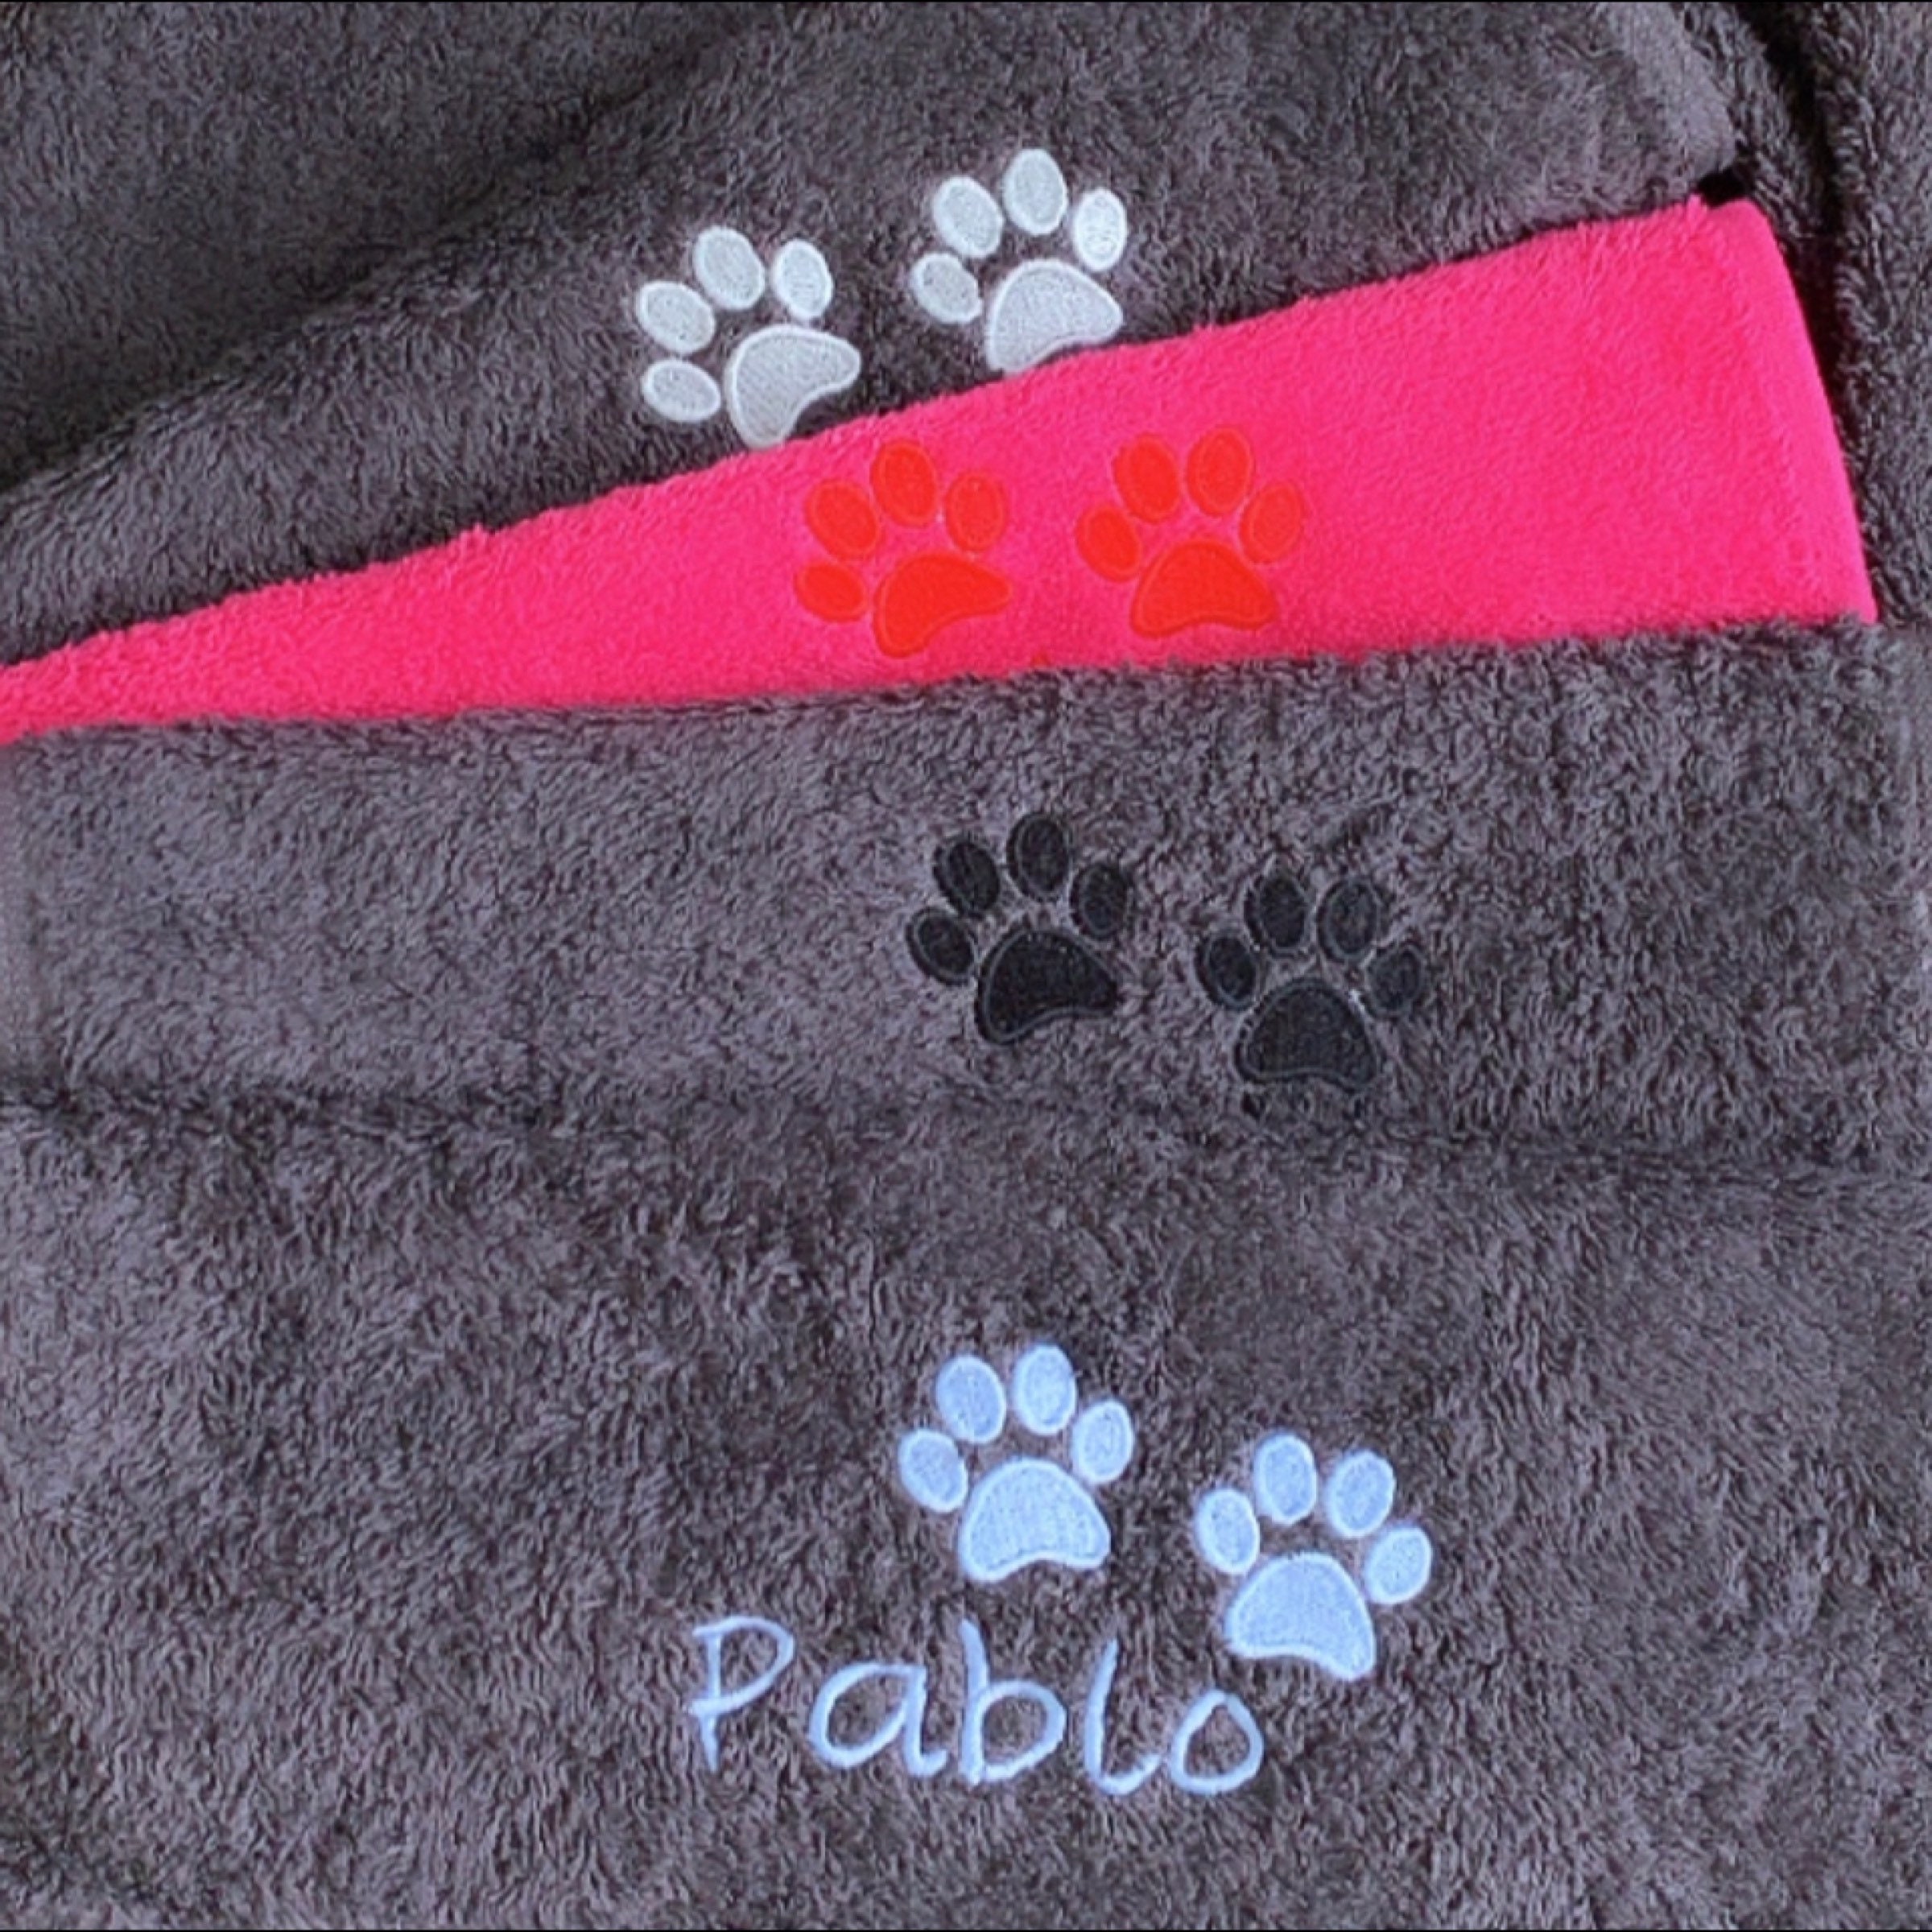 Embroidered Dog Paw Towel with Paw Print Design Soft 100% | Etsy